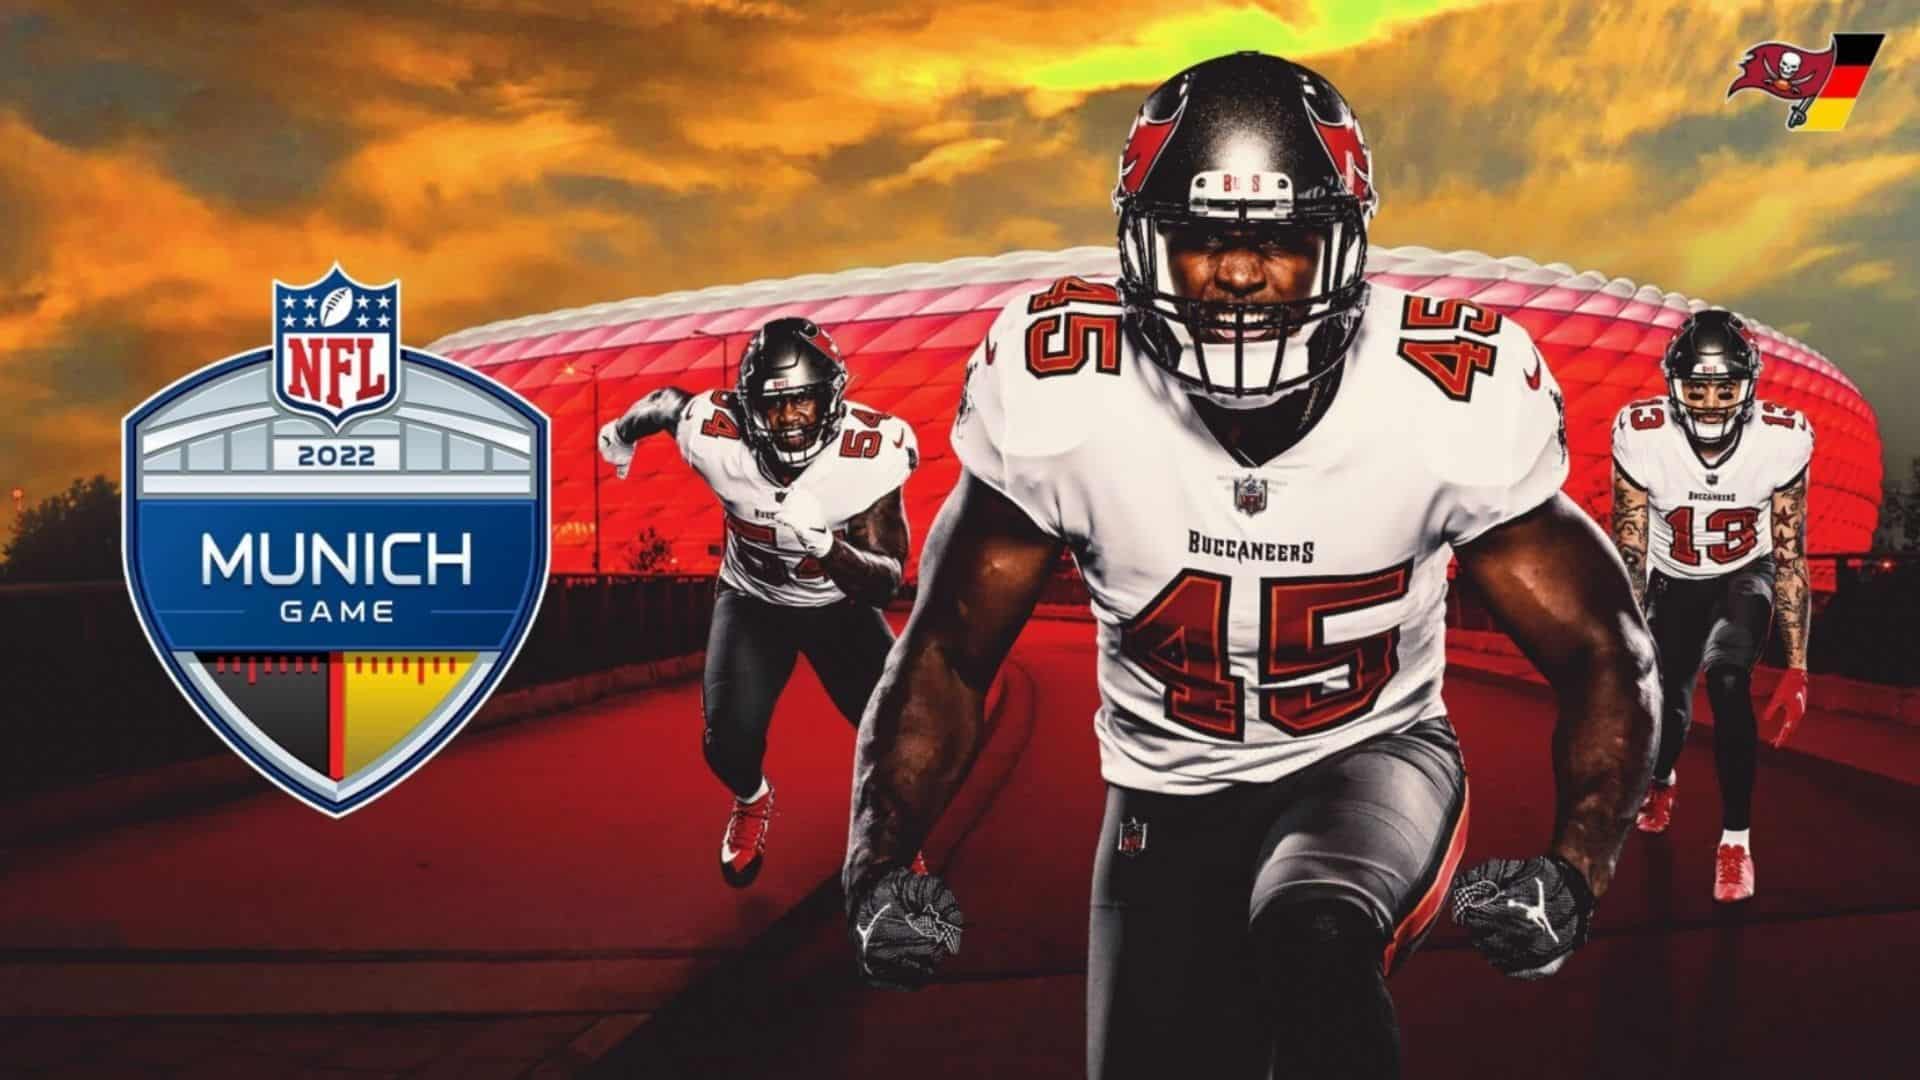 Bucs to play Seahawks in first ever NFL game in Germany this